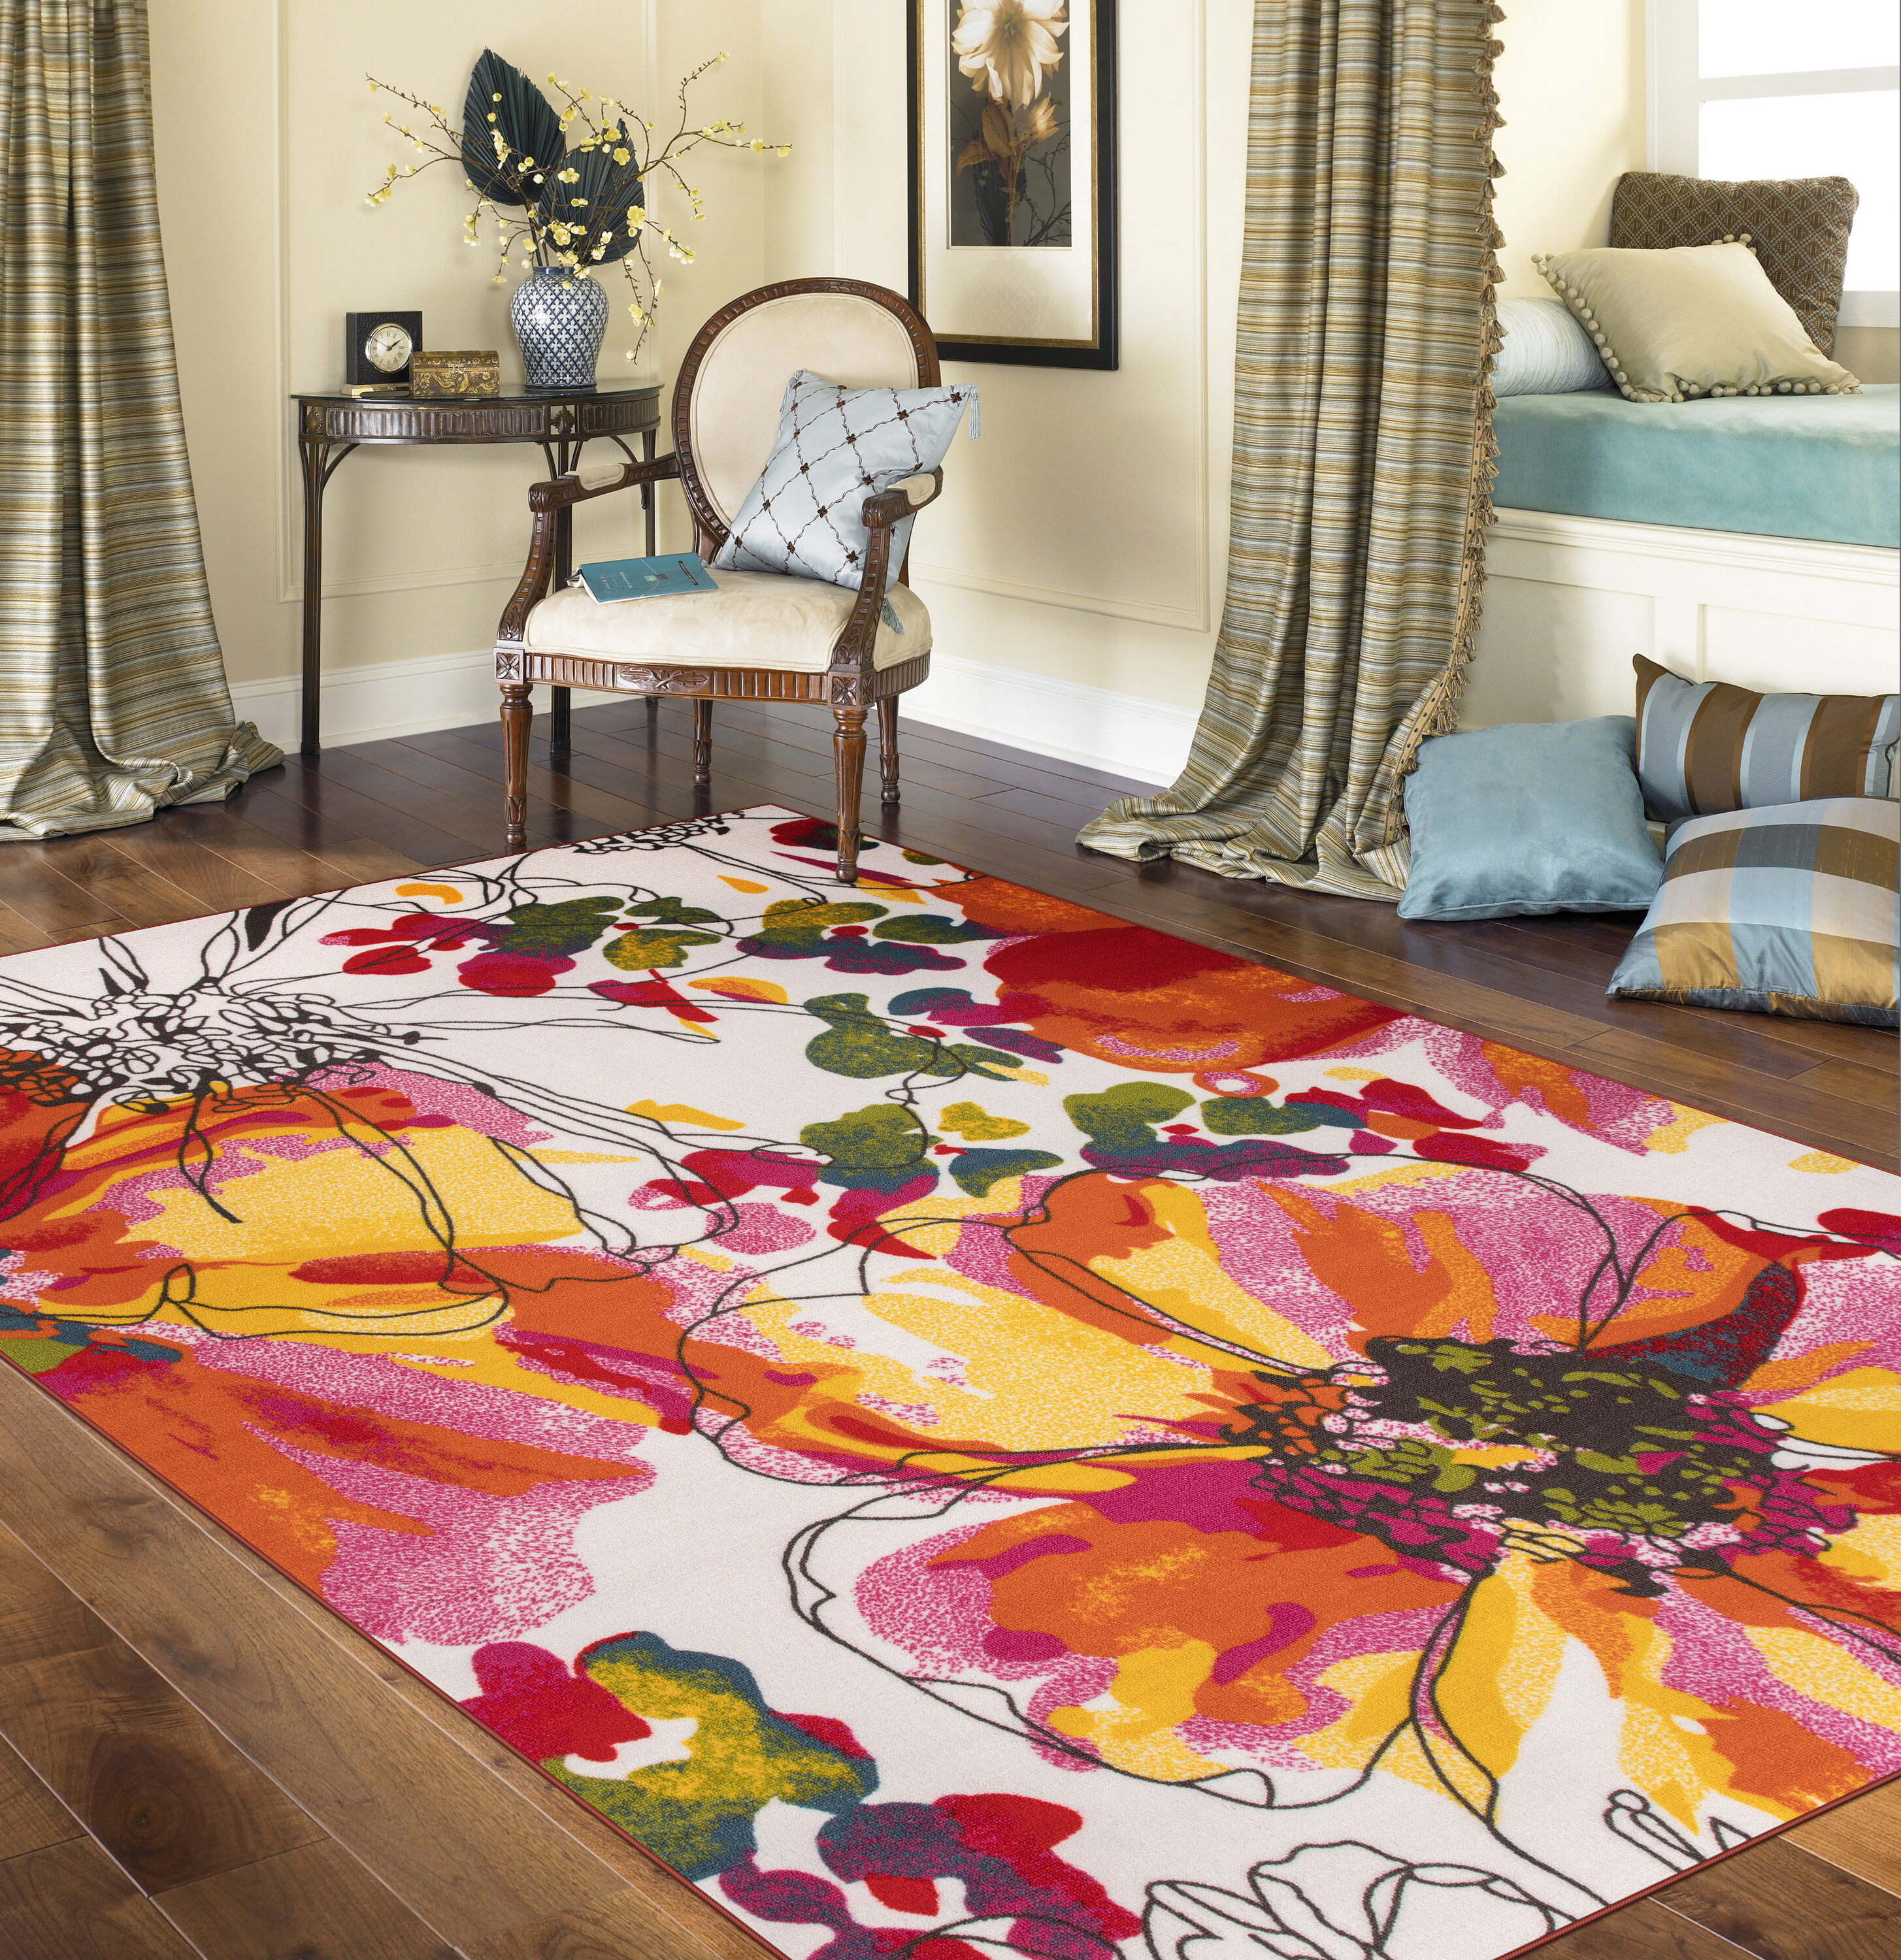 World Rug Gallery Contemporary Large Floral Non-Slip (Non-Skid) Gray 5'3 inch x 7'3 inch Indoor Area Rug